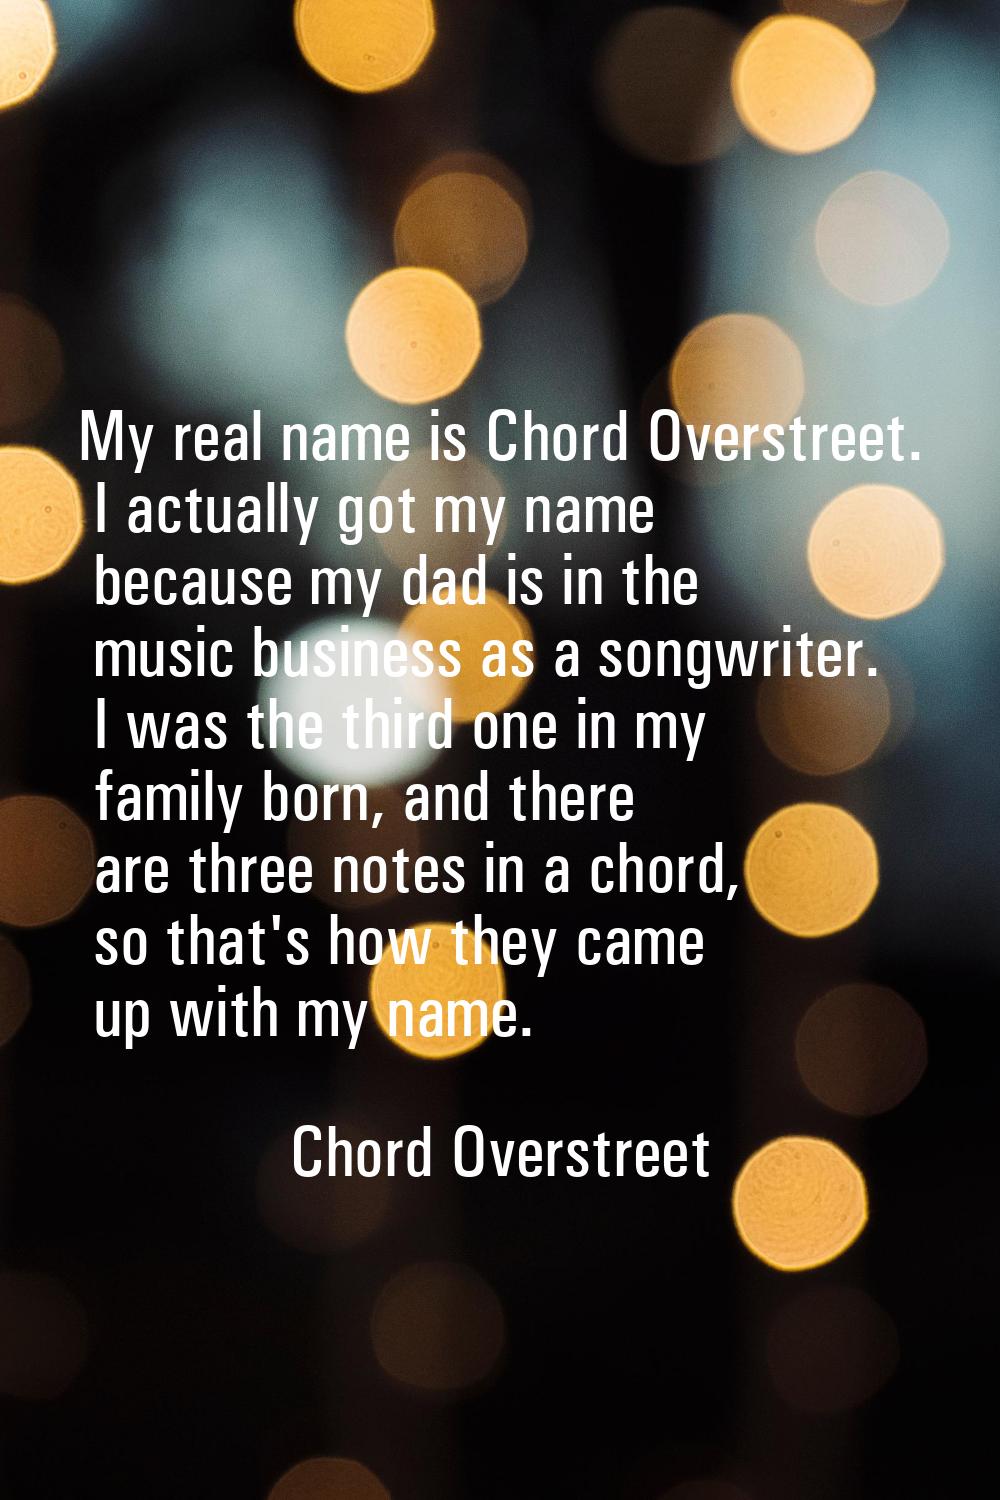 My real name is Chord Overstreet. I actually got my name because my dad is in the music business as